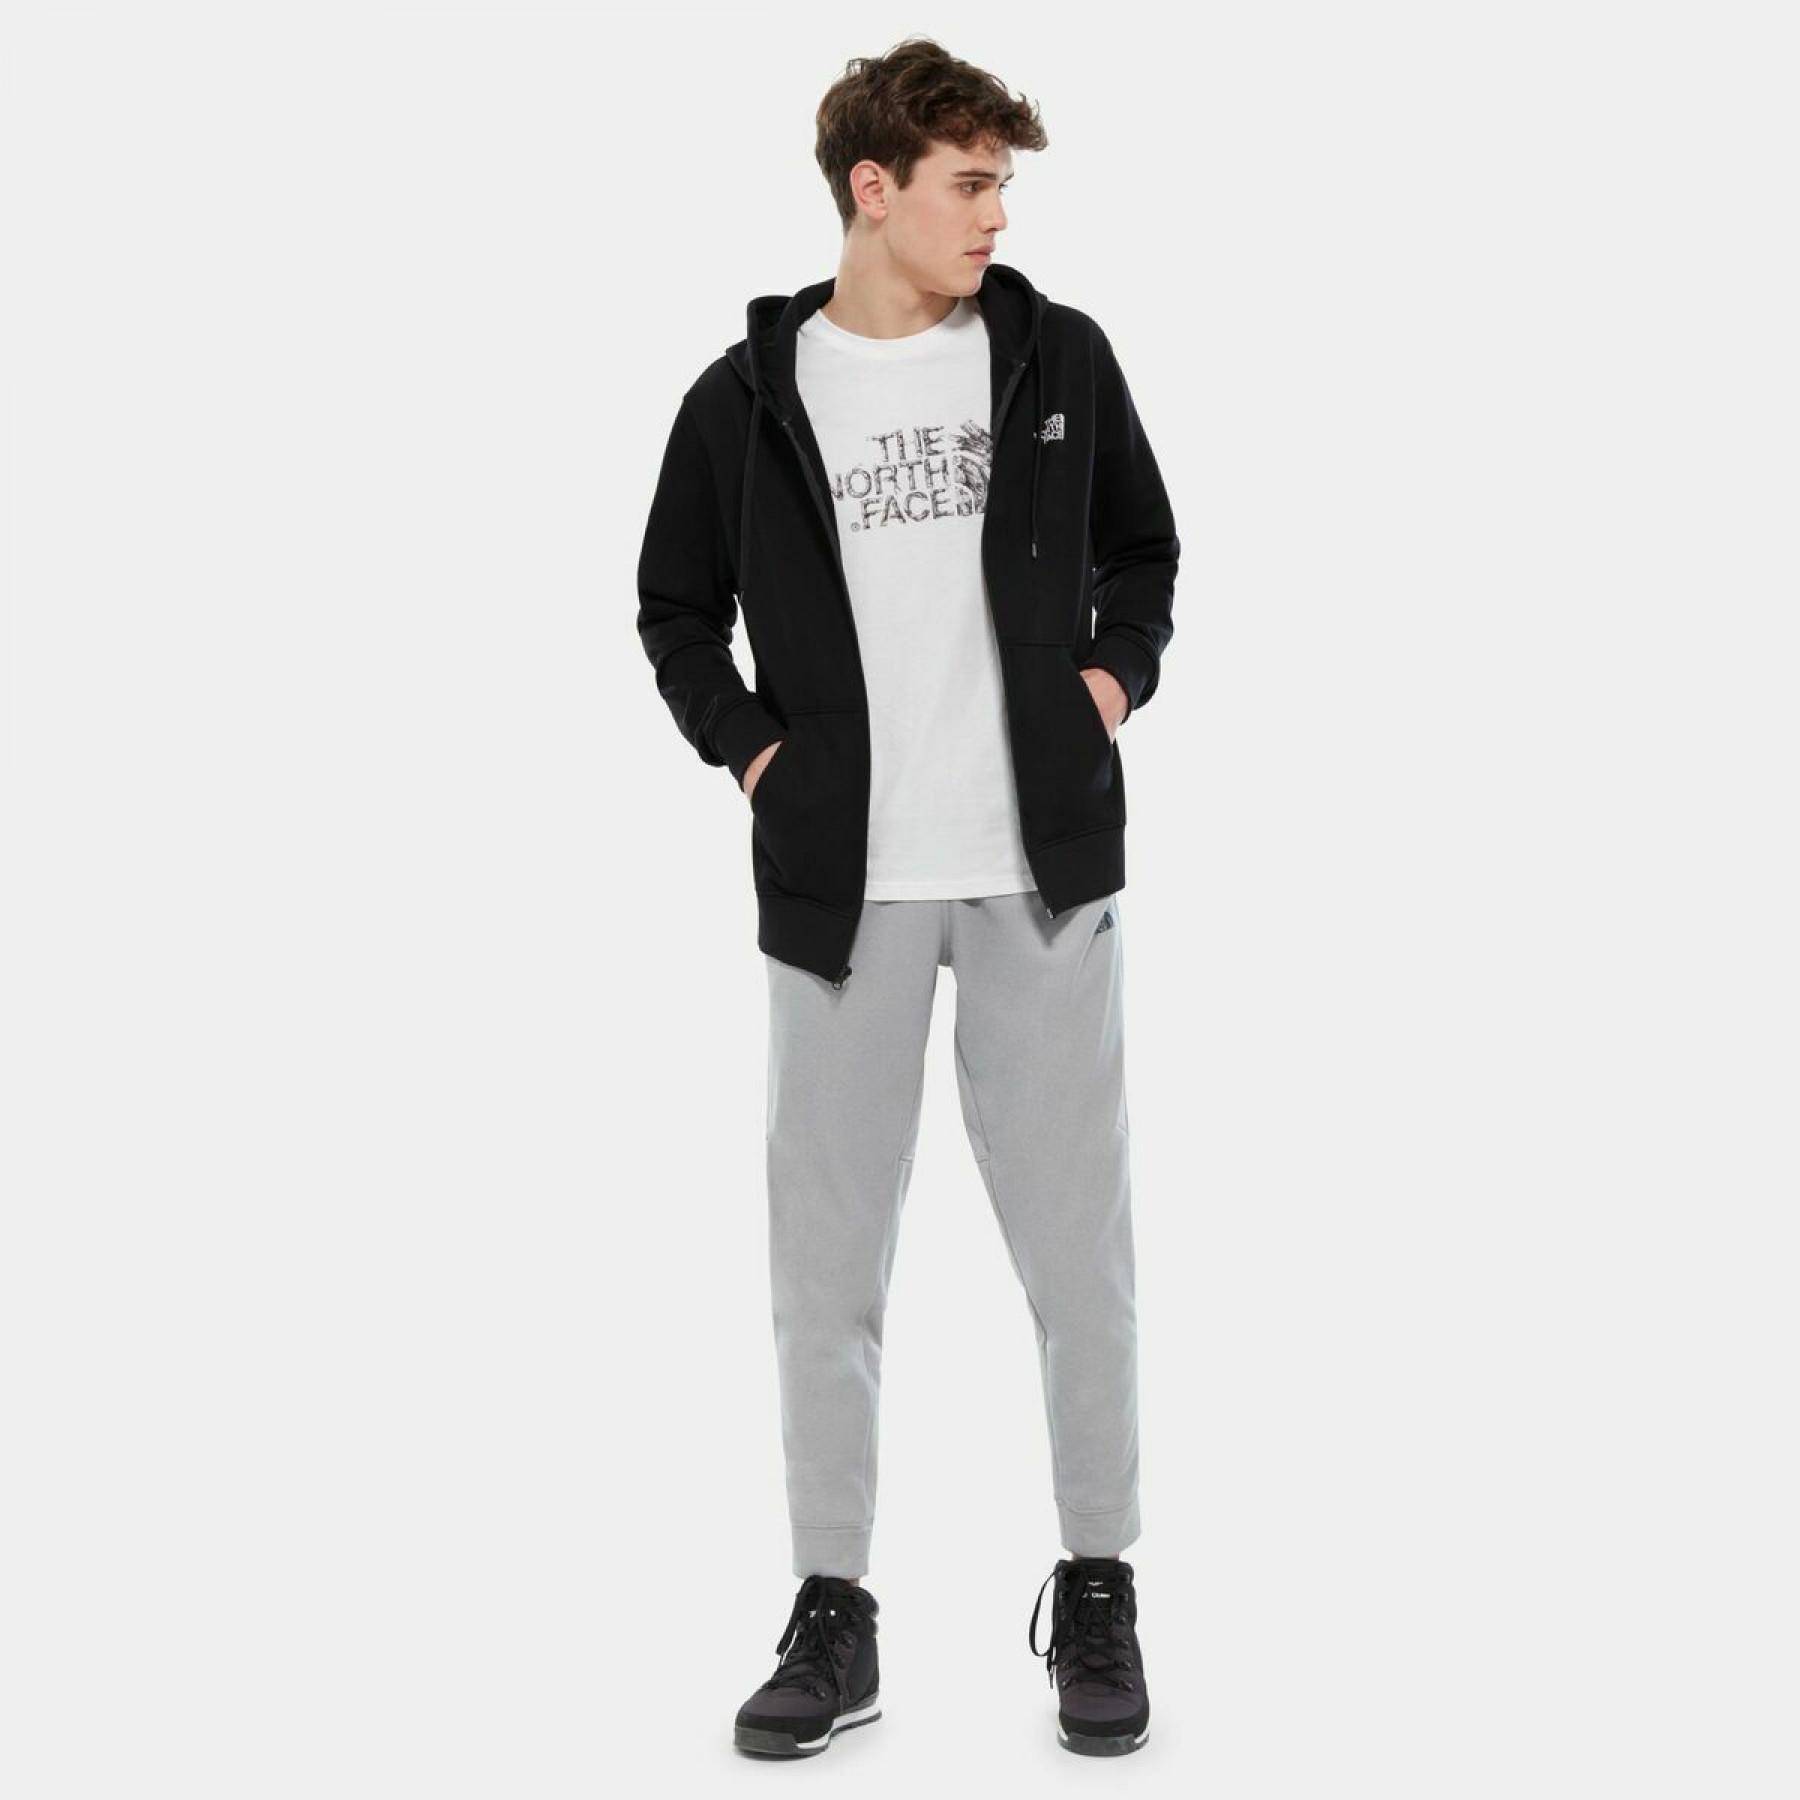 Rits hoodie The North Face Coton